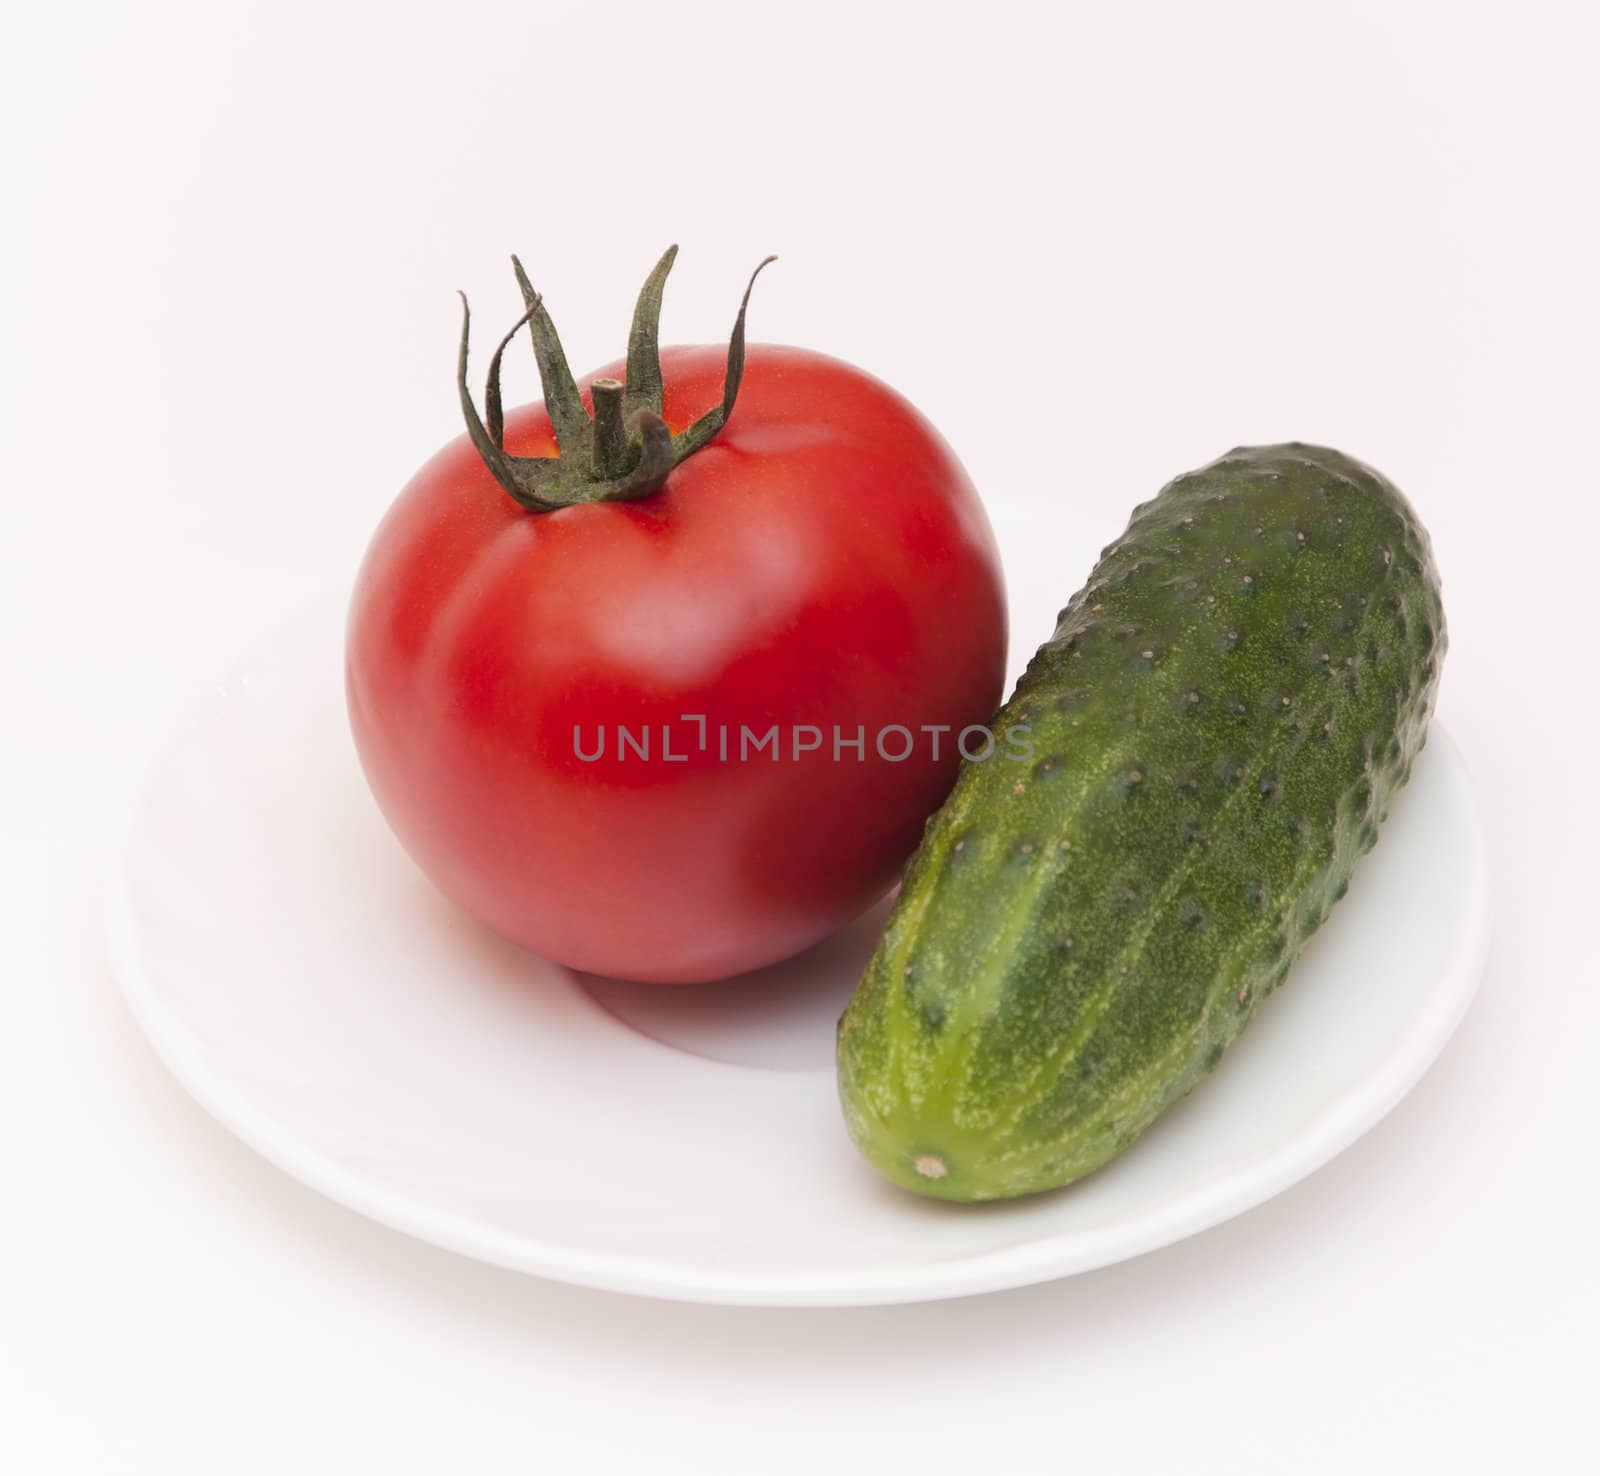 Green cucumber and red tomato on white saucer